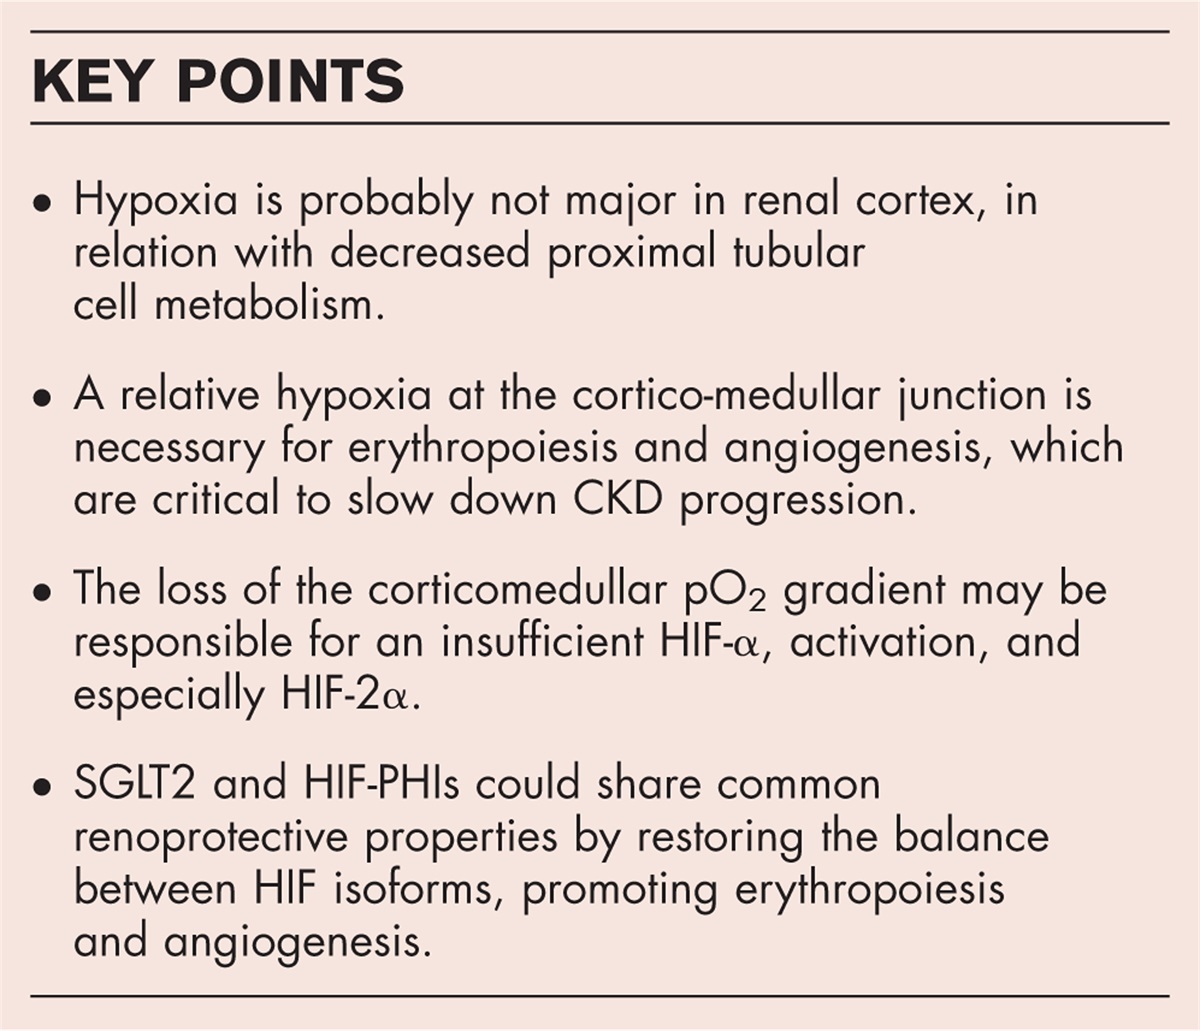 The role of hypoxia in chronic kidney disease: a nuanced perspective